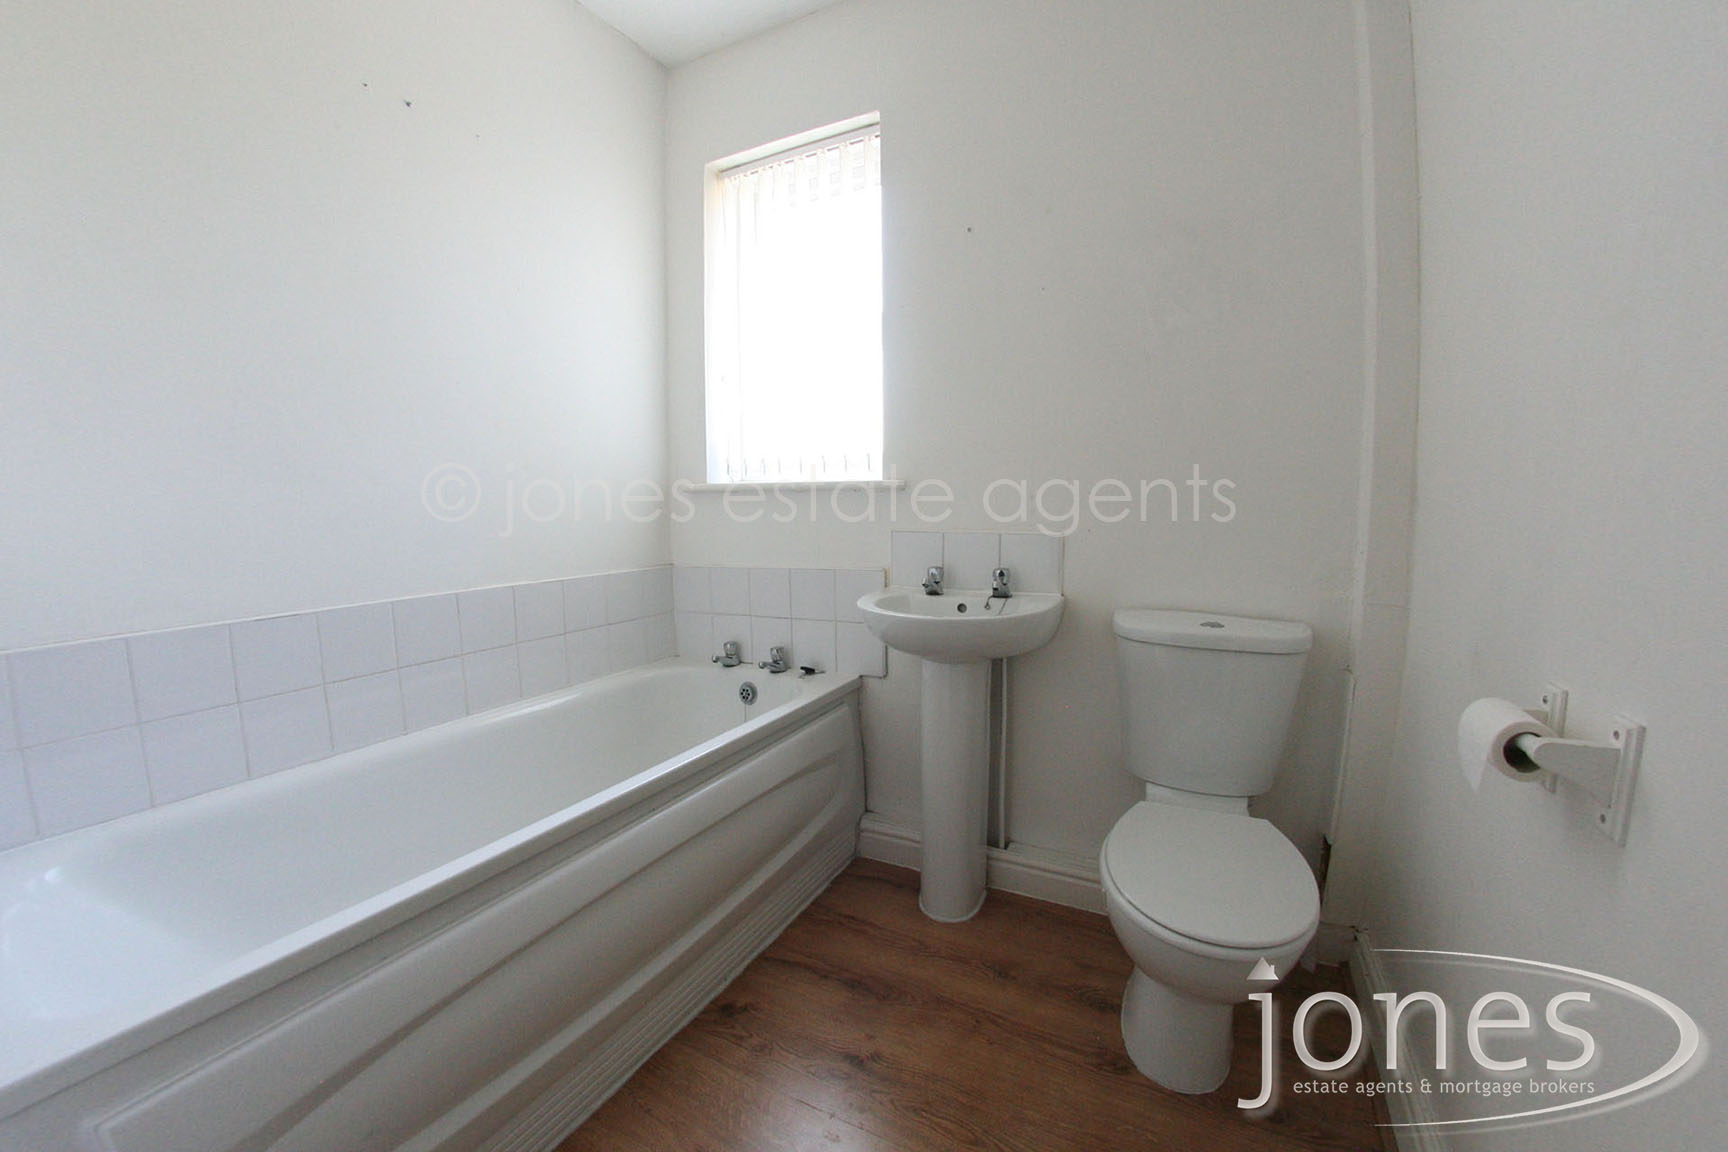 Home for Sale Let - Photo 08 North Road West, Wingate, TS28 5AP